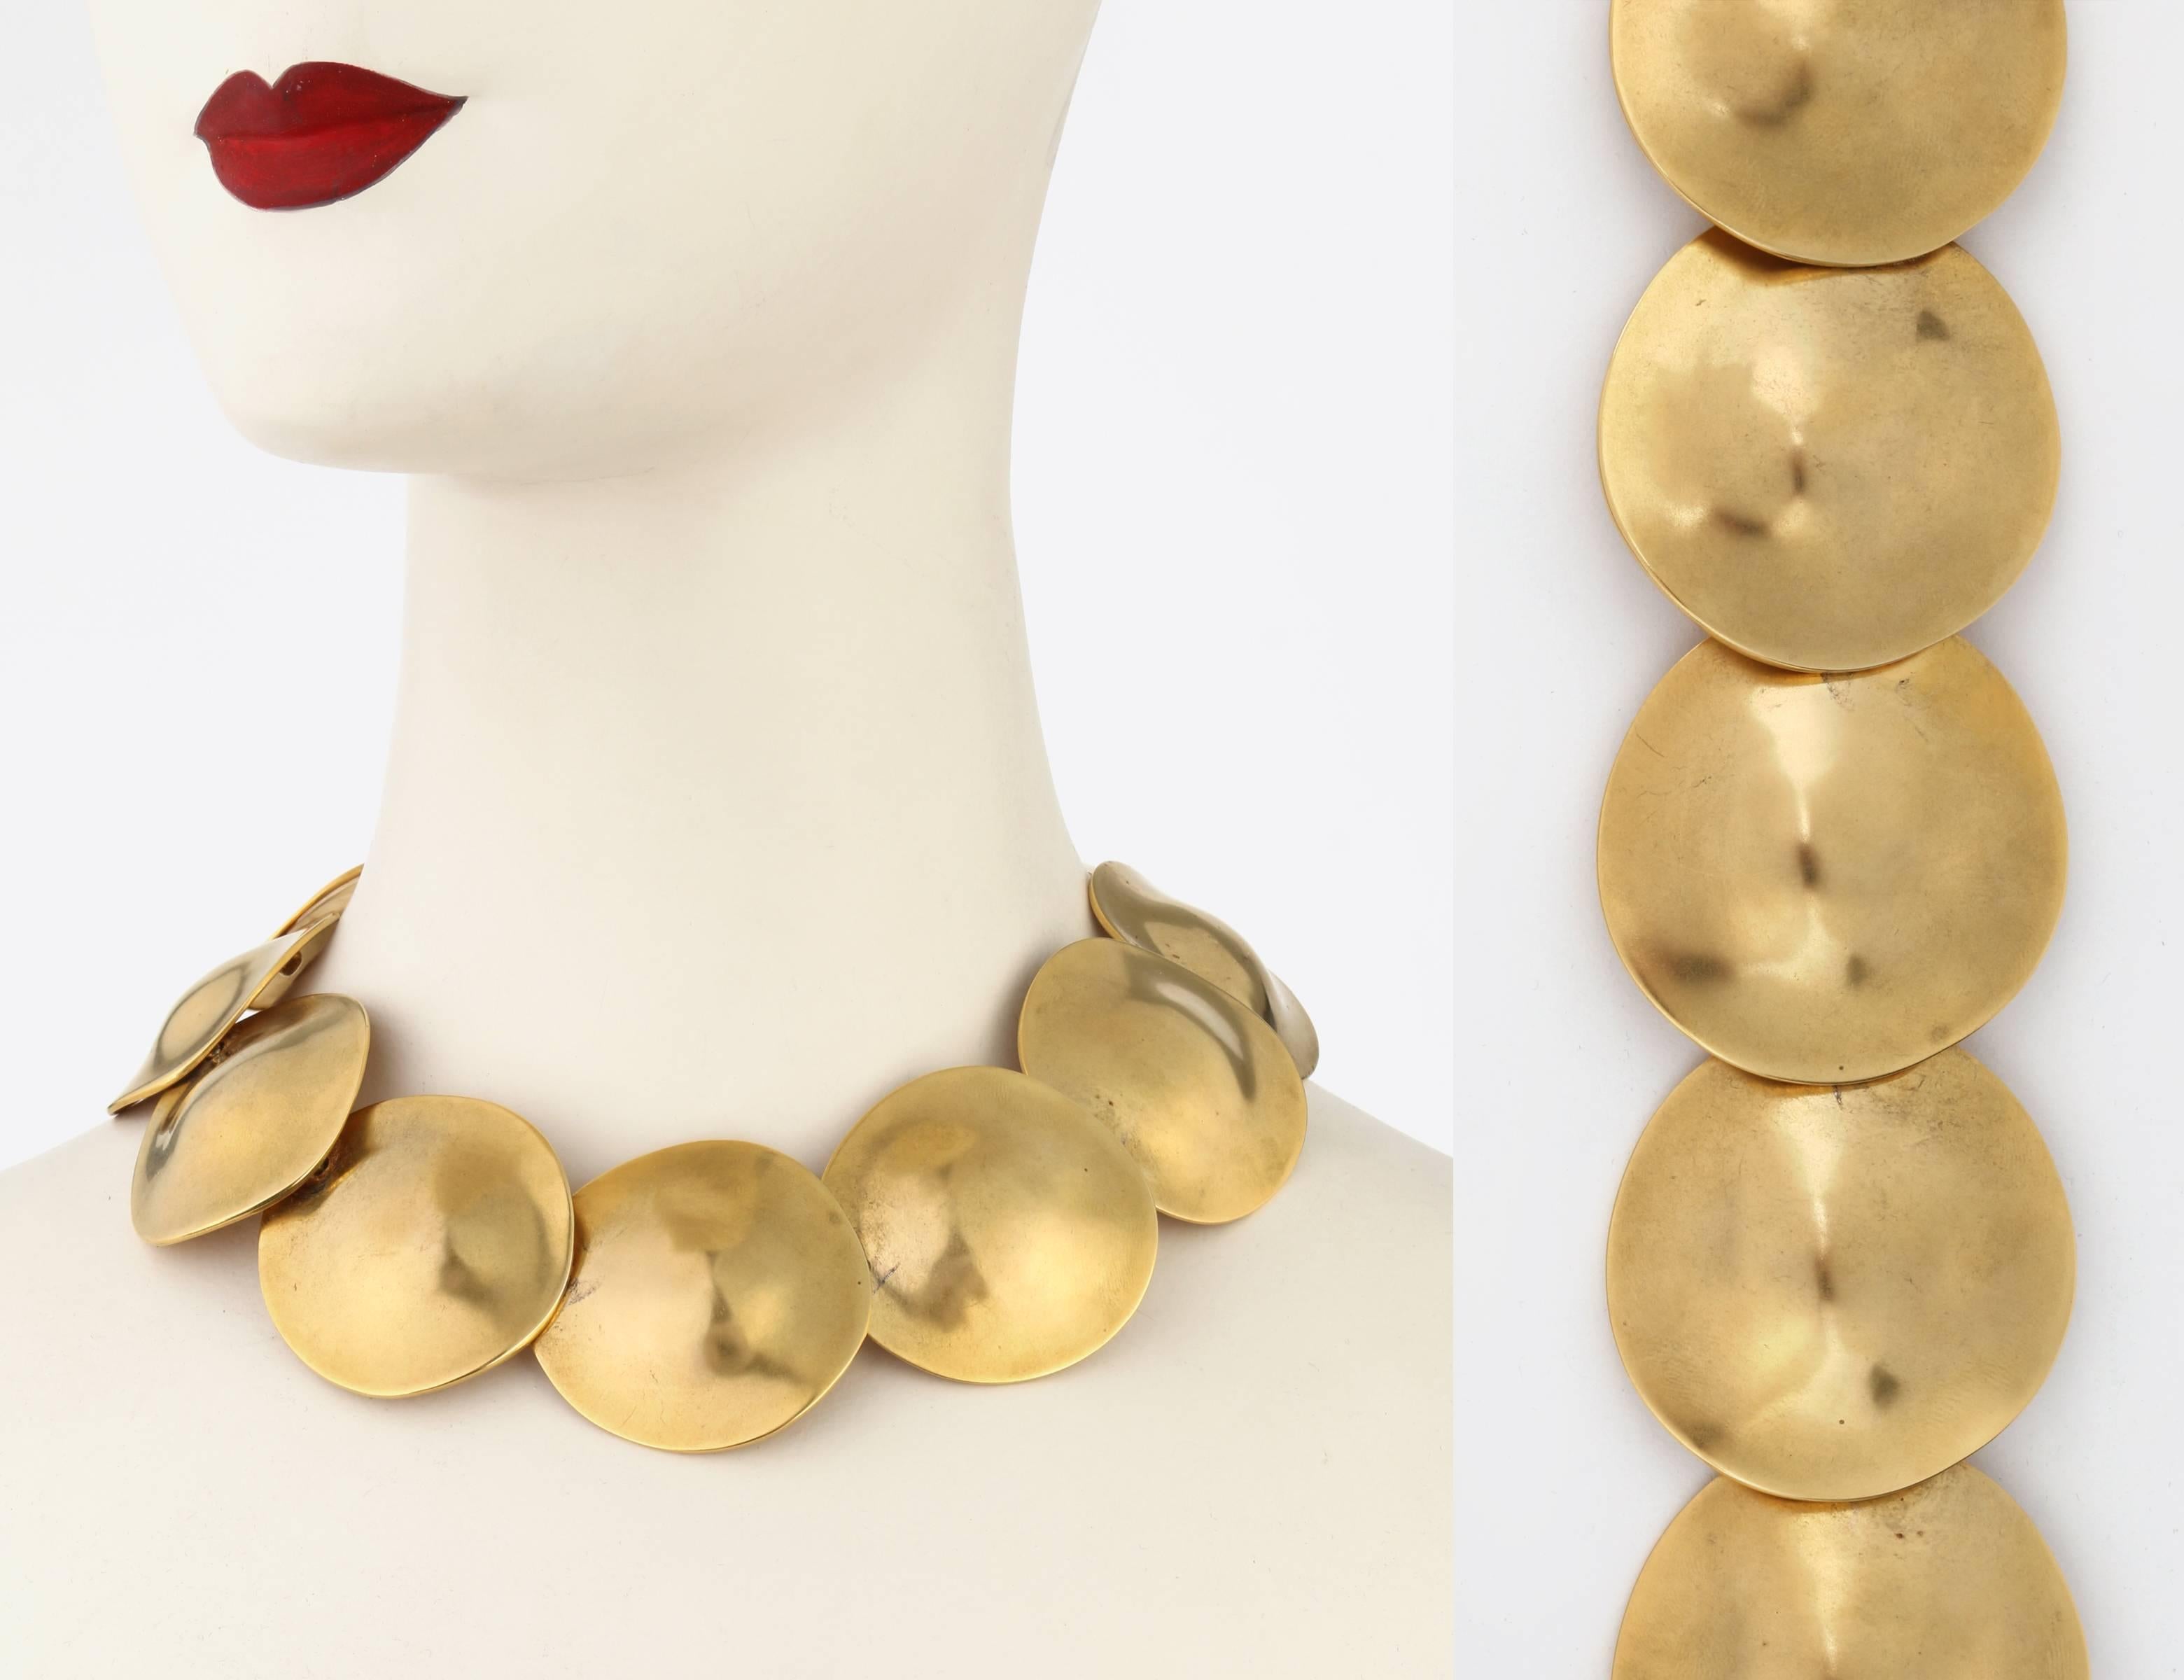 Vintage signed Robert Lee Morris c.1981 24K gold plated brass disc necklace. From a Cory award winning collection, this rare necklace was originally designed for a Calvin Klein fall 1981 runway show. Handcrafted domed sculpted discs measure